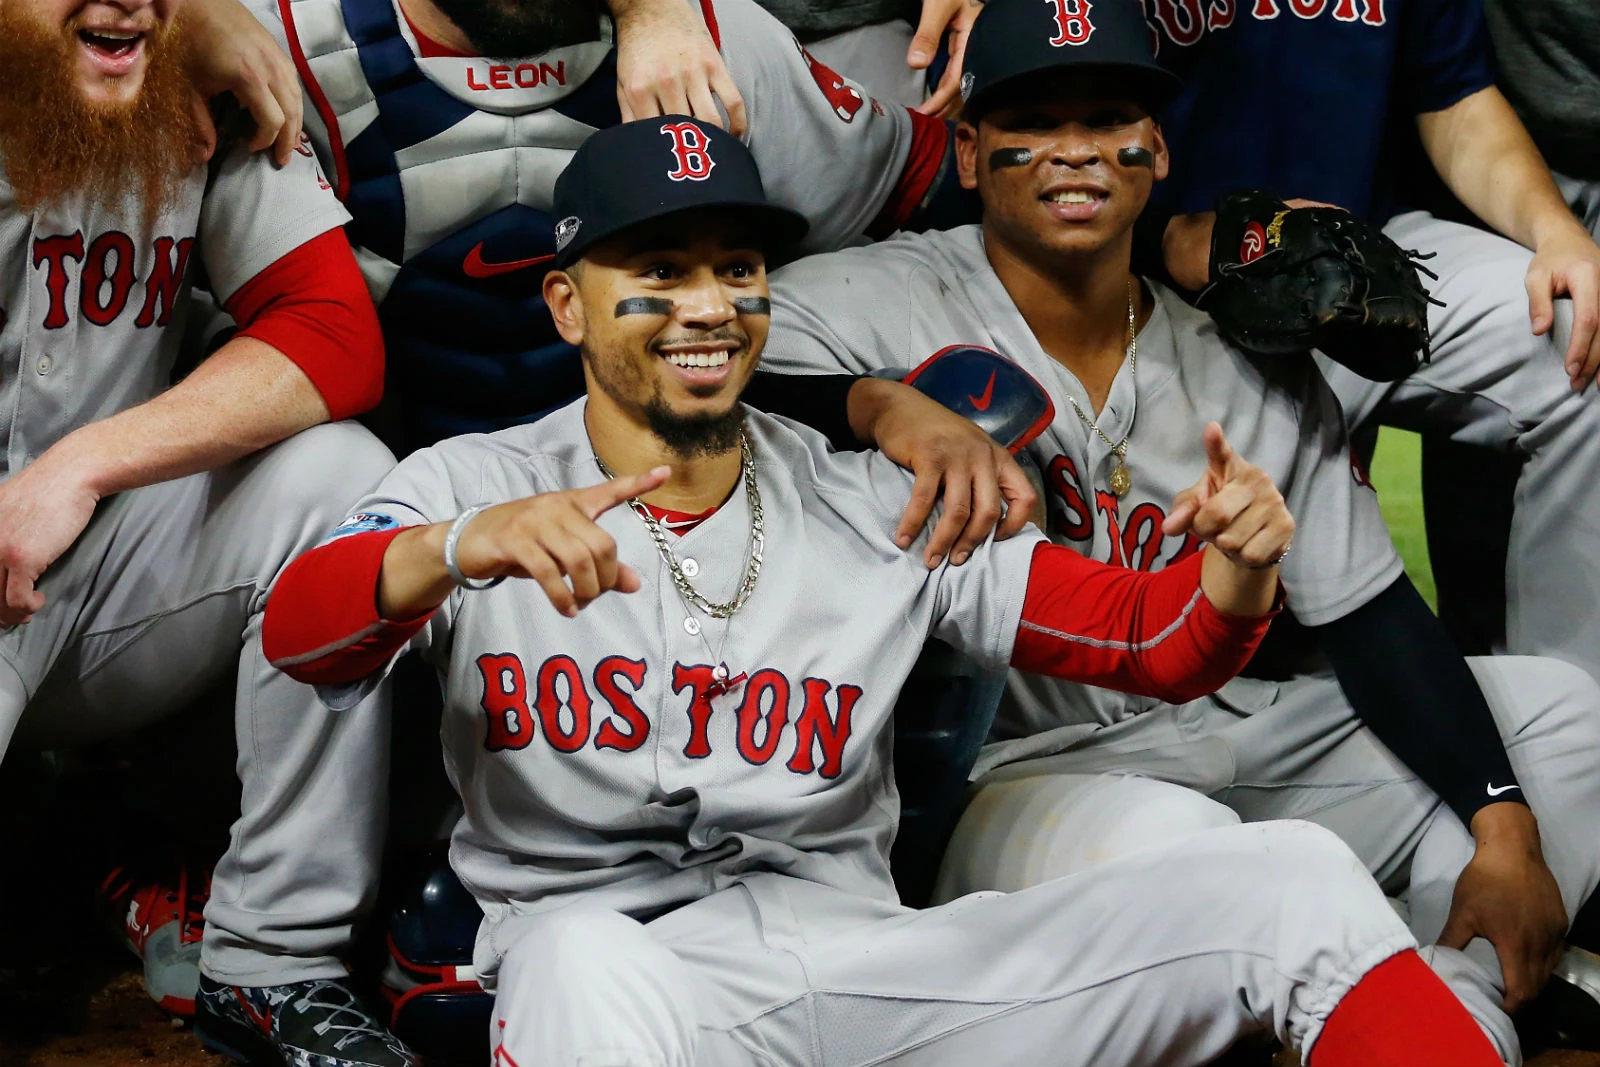 Top 5 Reasons You Want The Boston Red Sox to Win the World Series